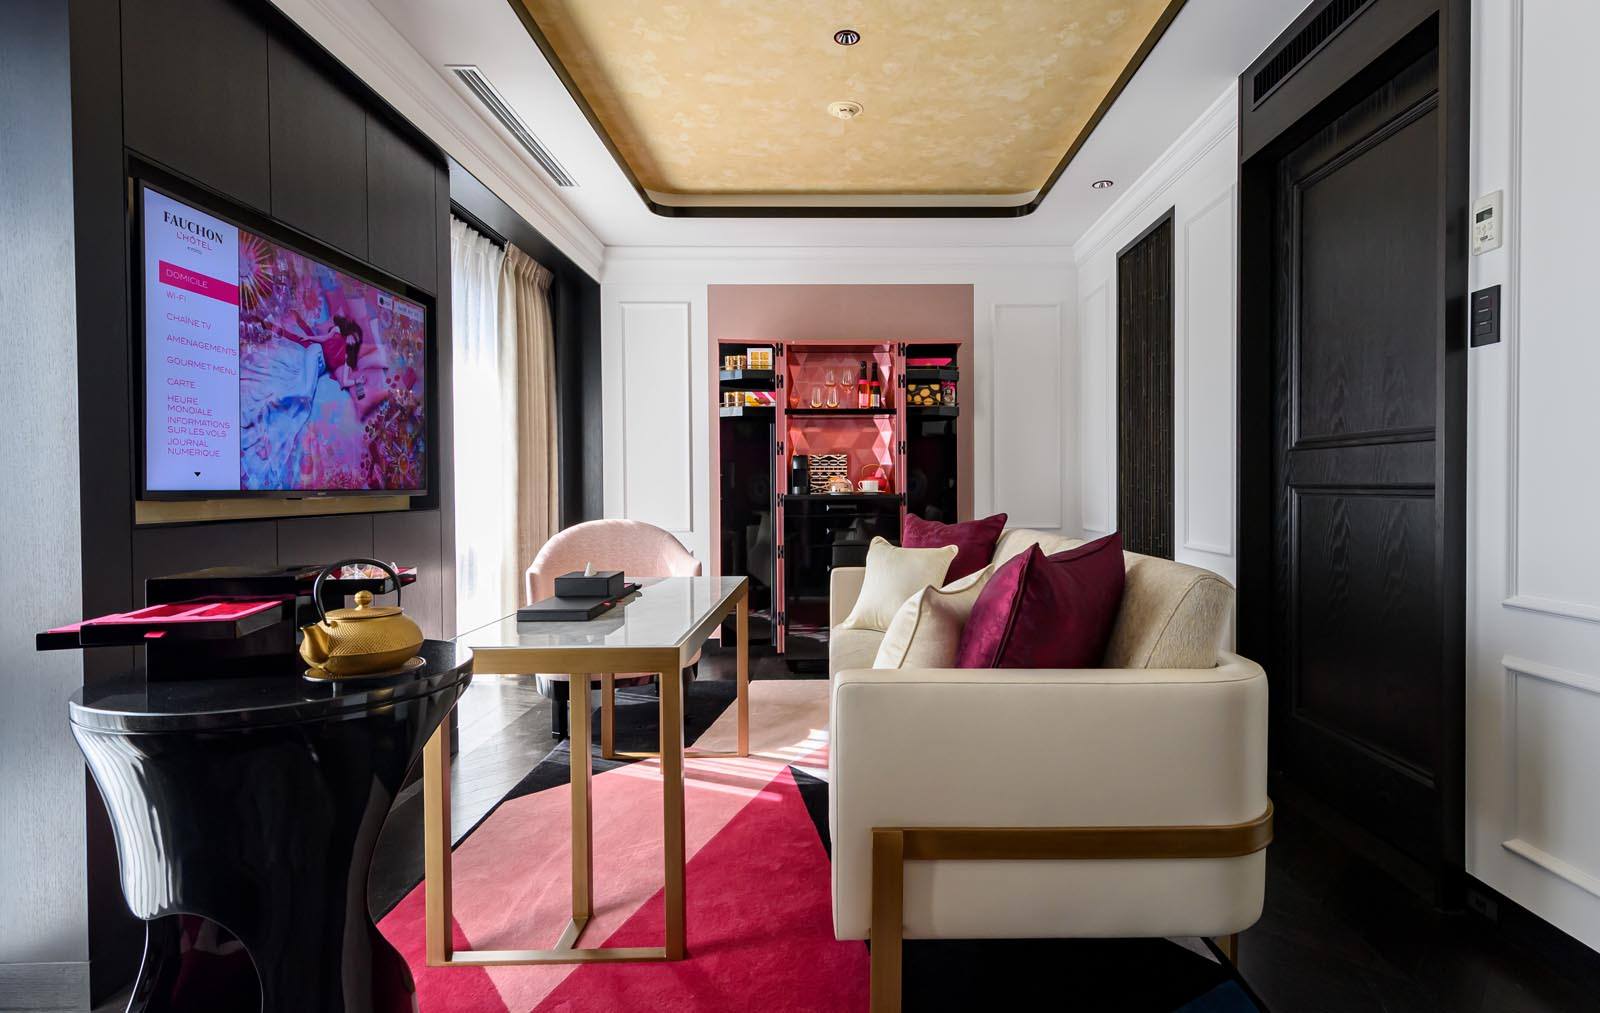 Each room at Fauchon L’Hotel Kyoto comes with a Gourmet Bar of complimentary treats